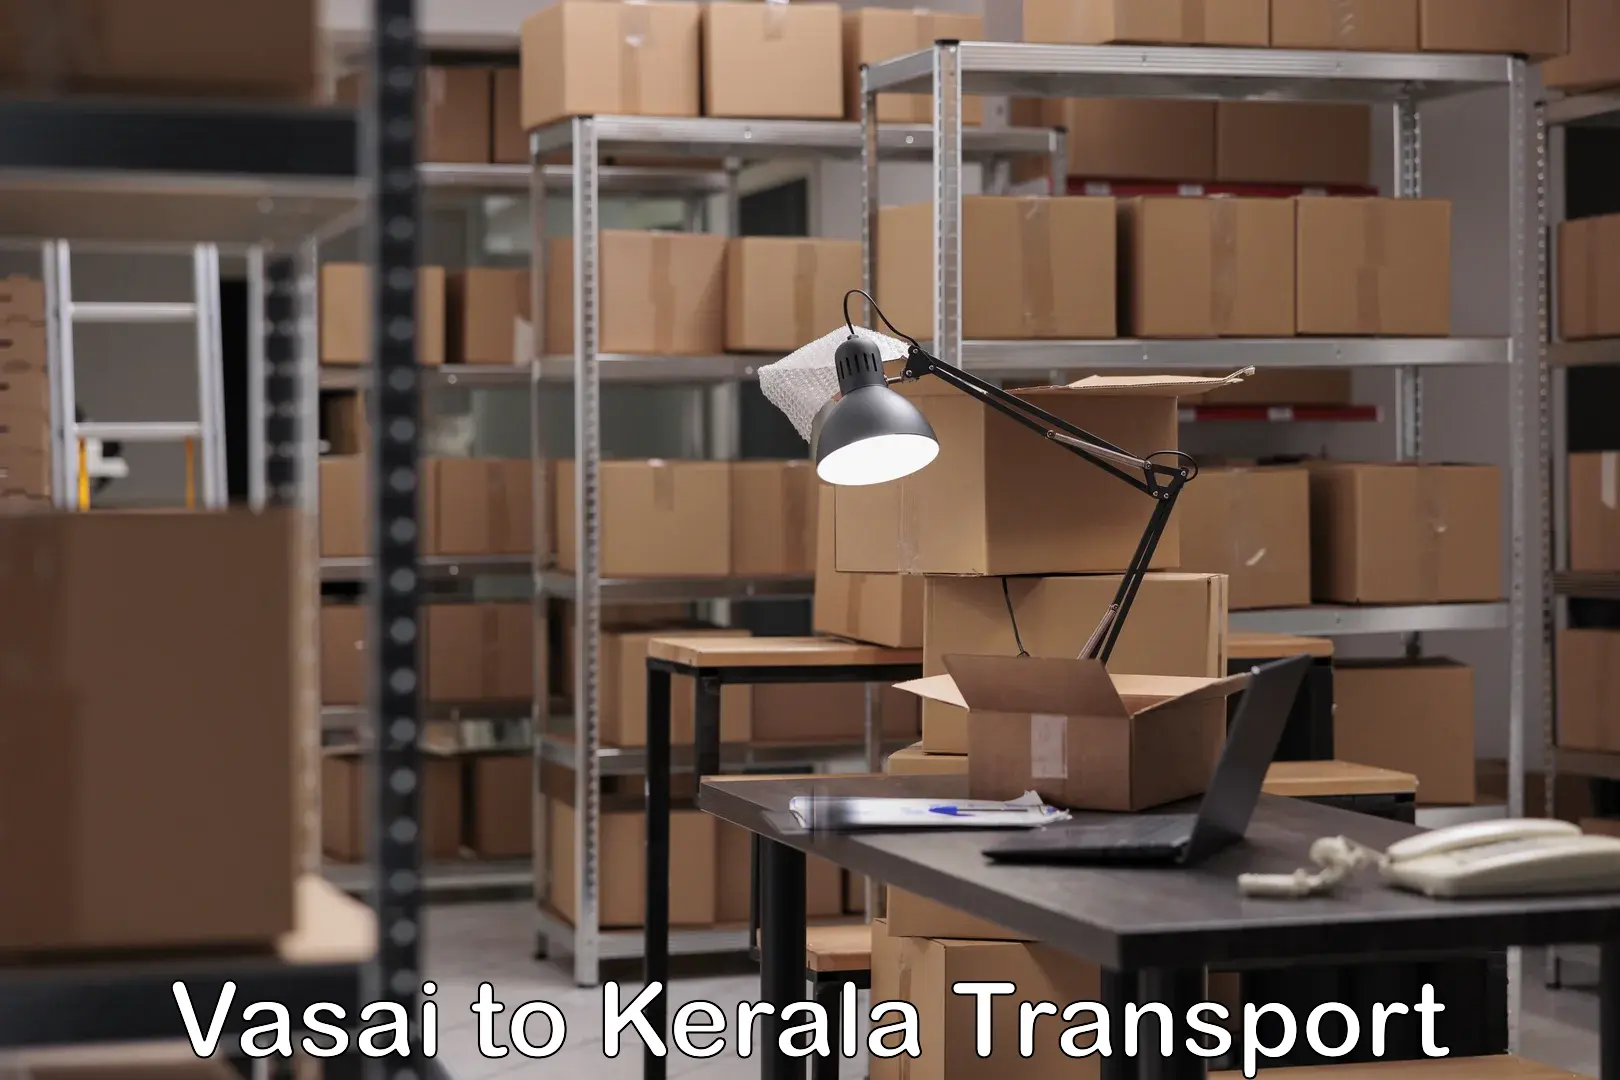 Commercial transport service Vasai to Kerala